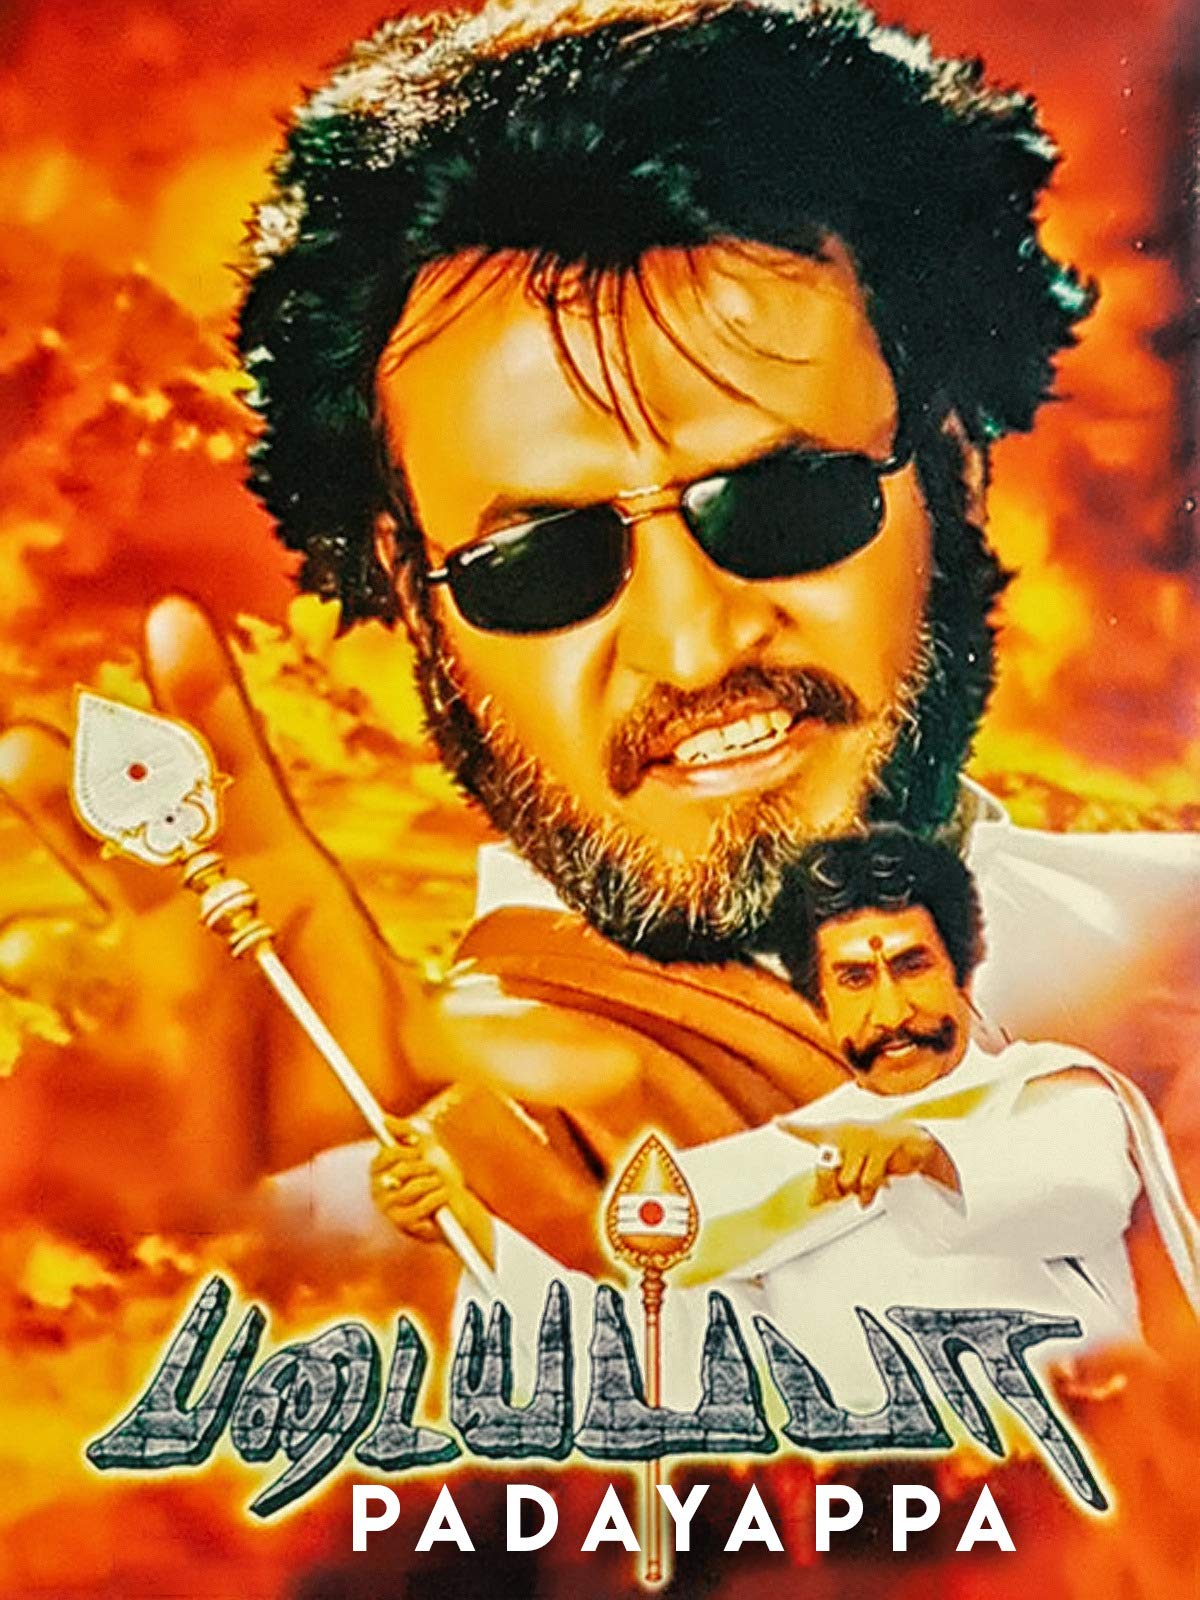 If you haven't Watched These Rajnikanth Award Winning Movies During Self-Quarantine! 4